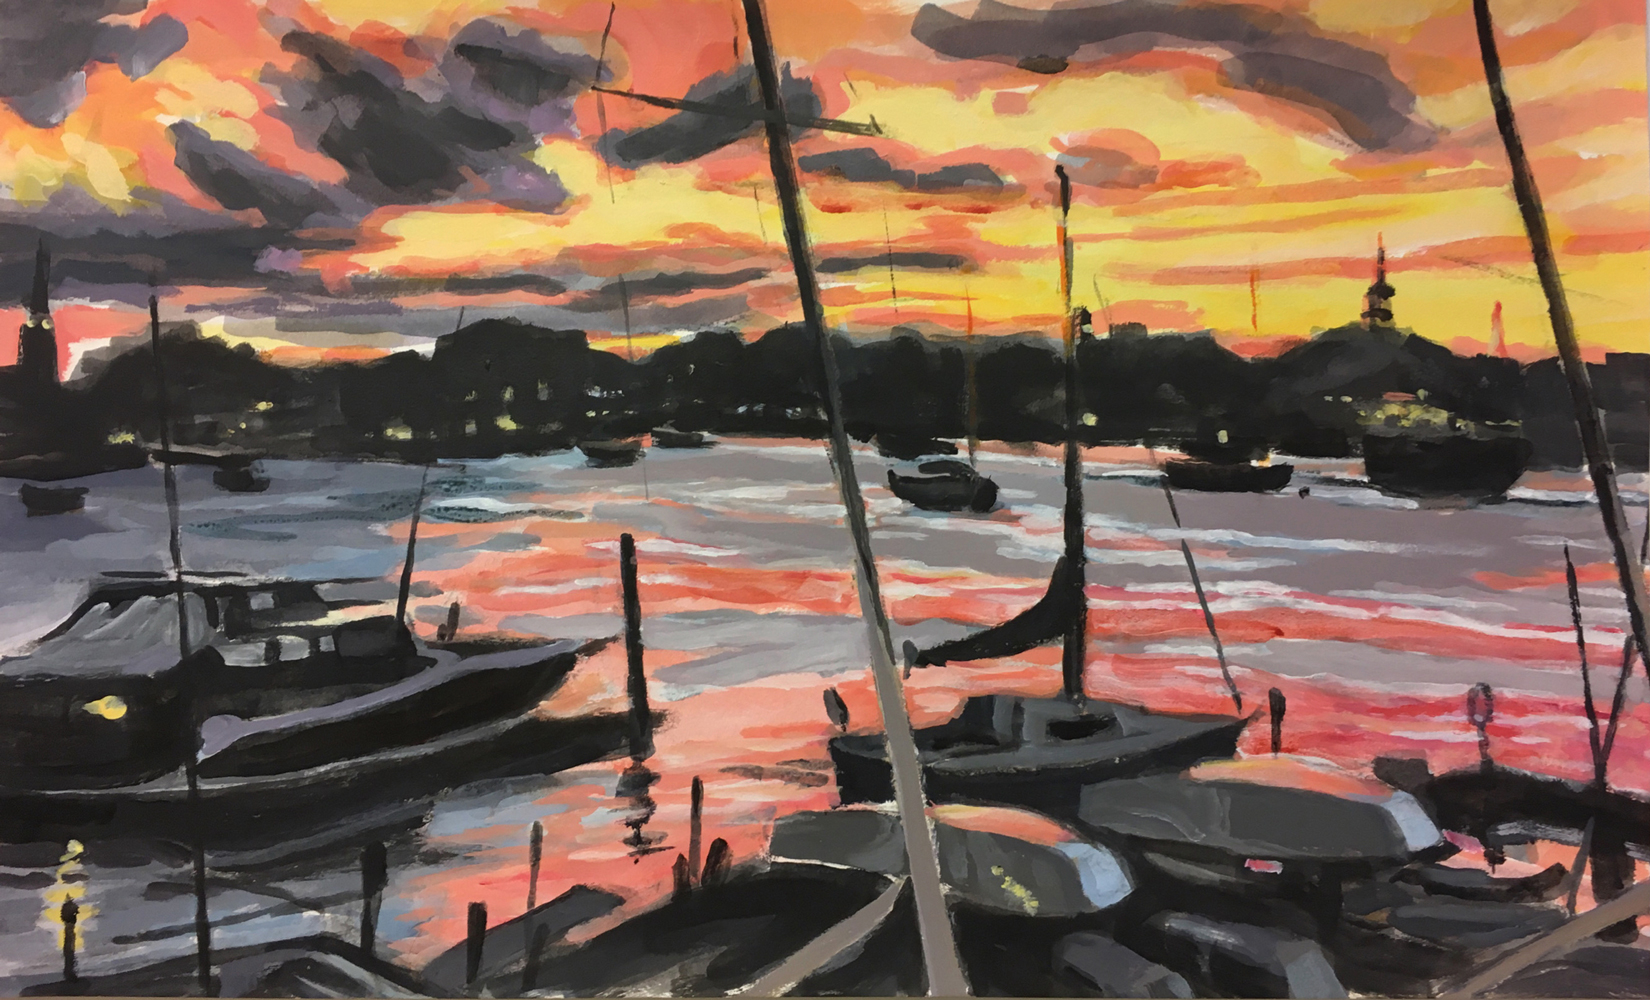 Annapolis Sunset, 2018, 11.75x 18 inches